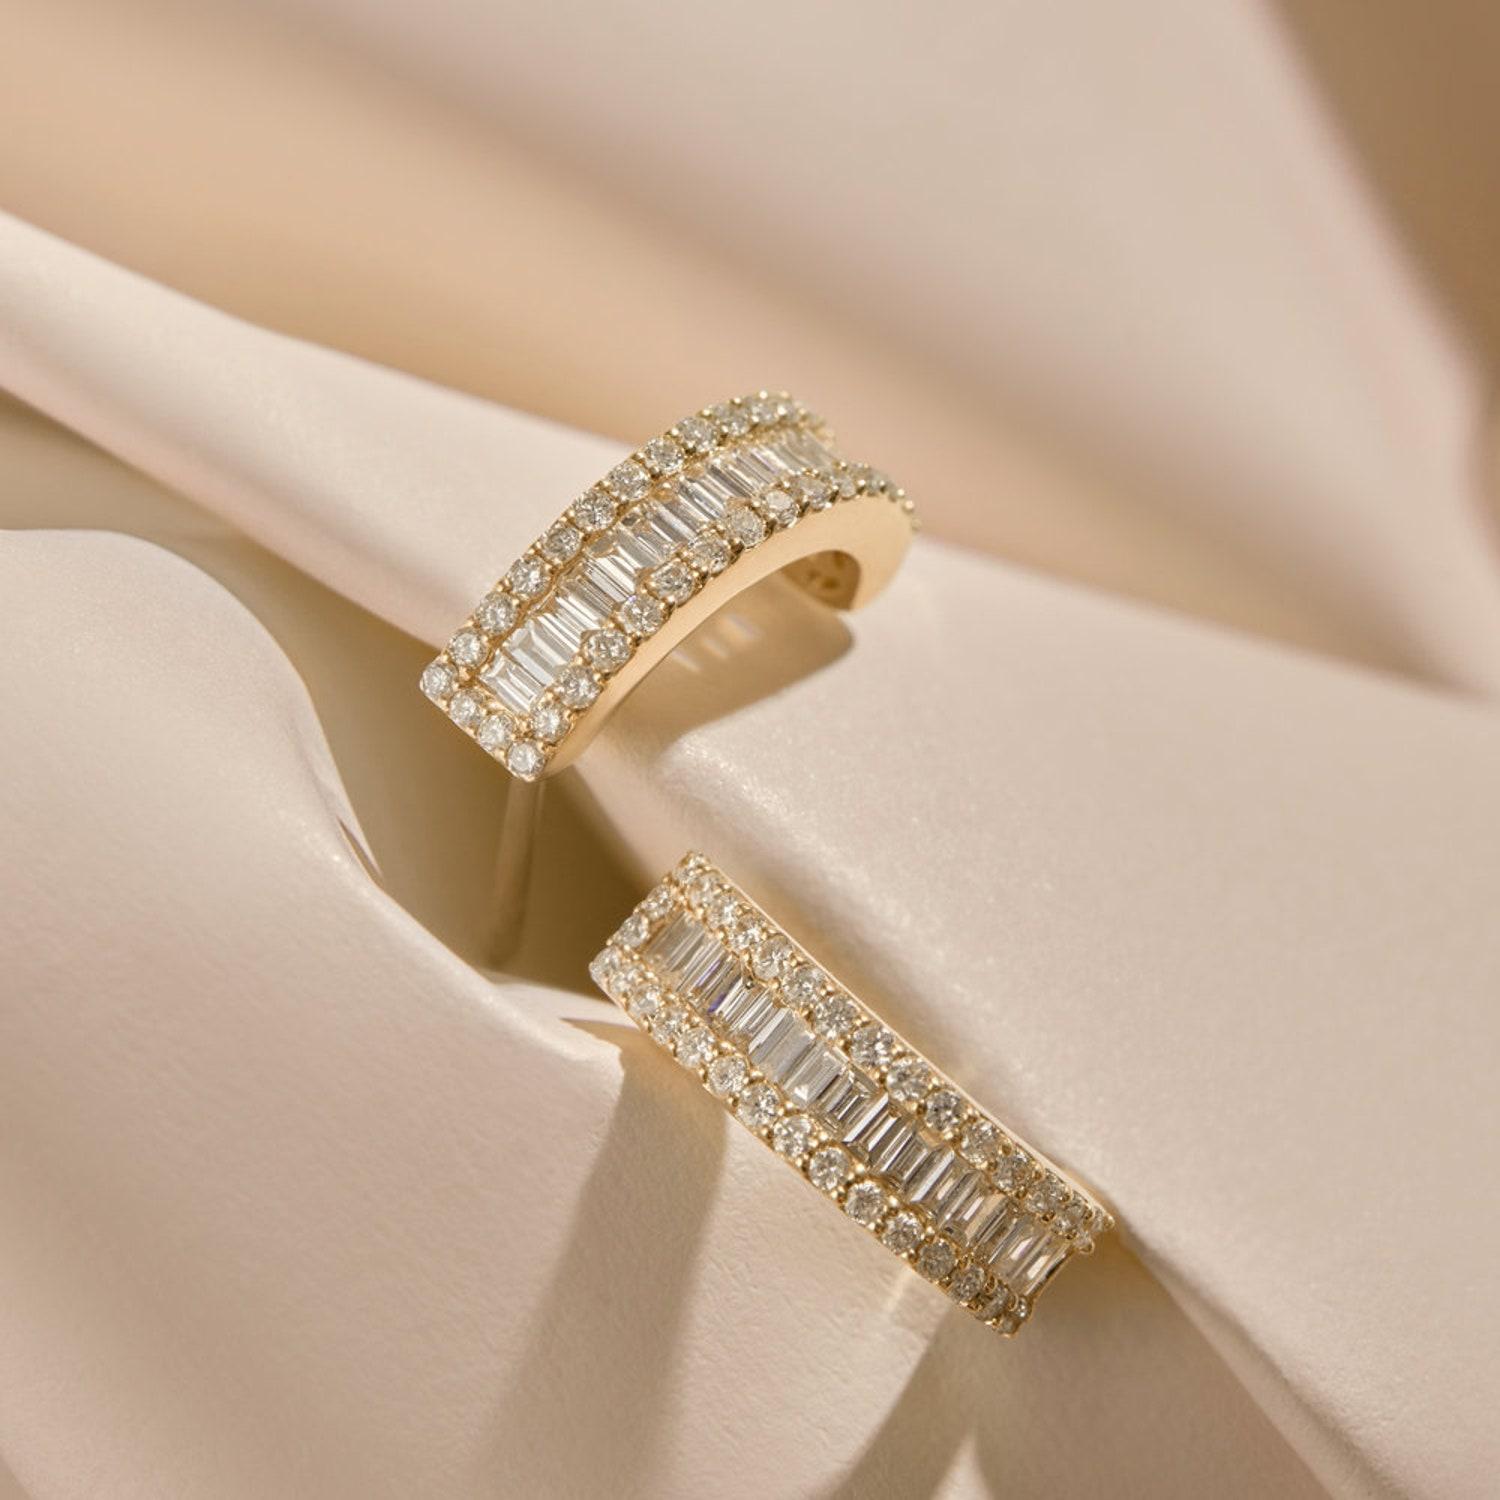 Diamond Earrings / 14k Gold Baguette and Round Diamond Micro Pave Earrings For Sale 2